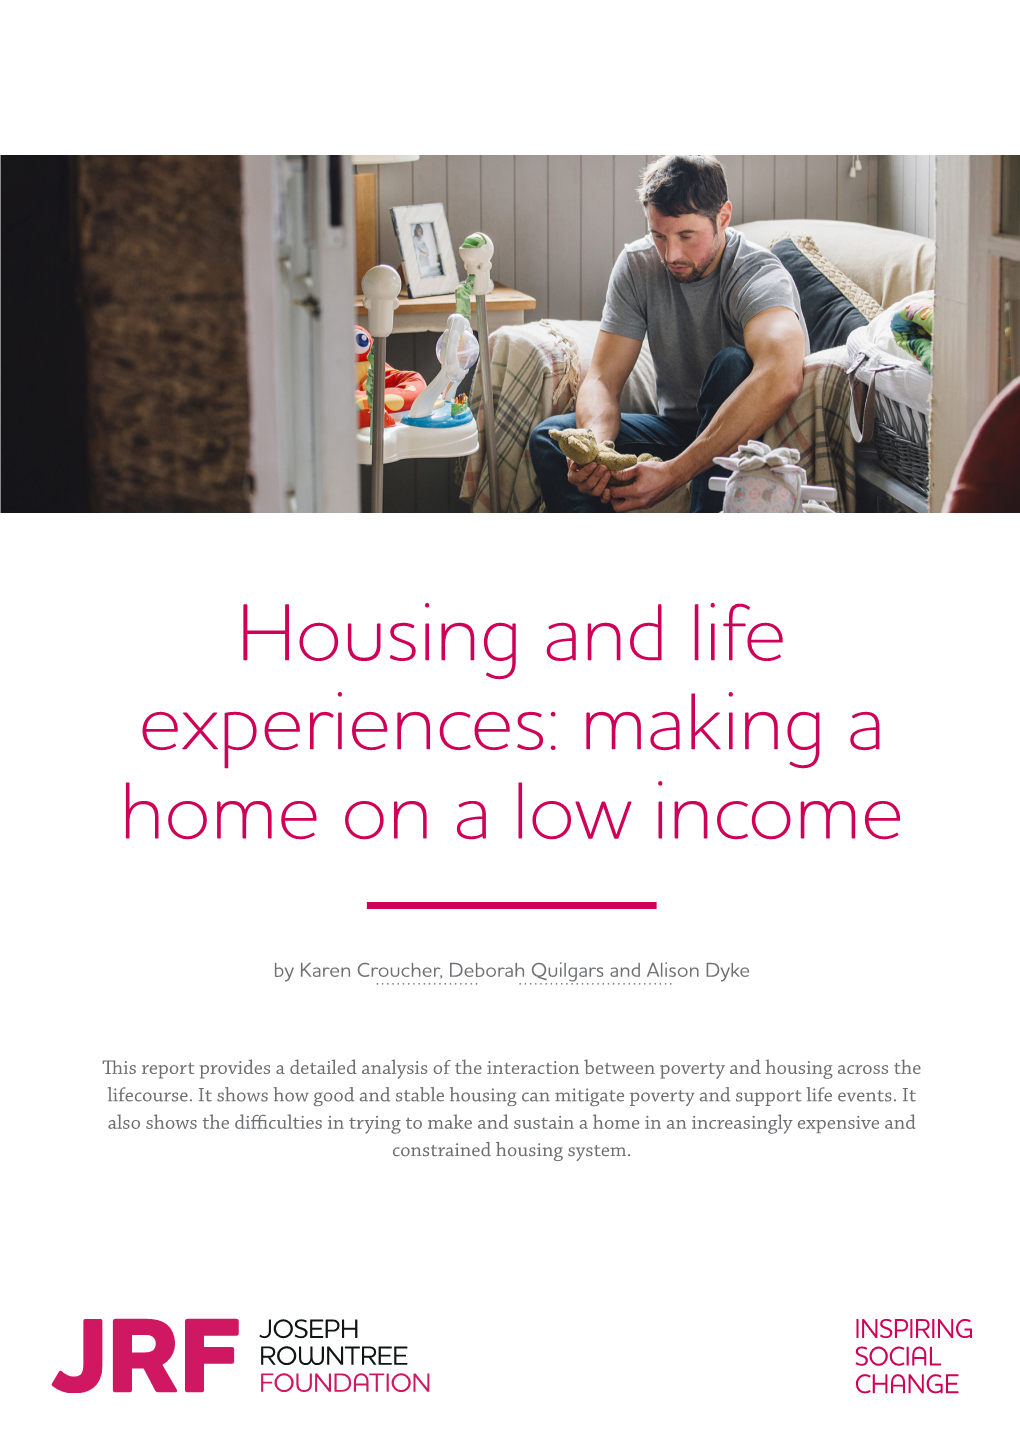 Housing and Life Experiences: Making a Home on a Low Income